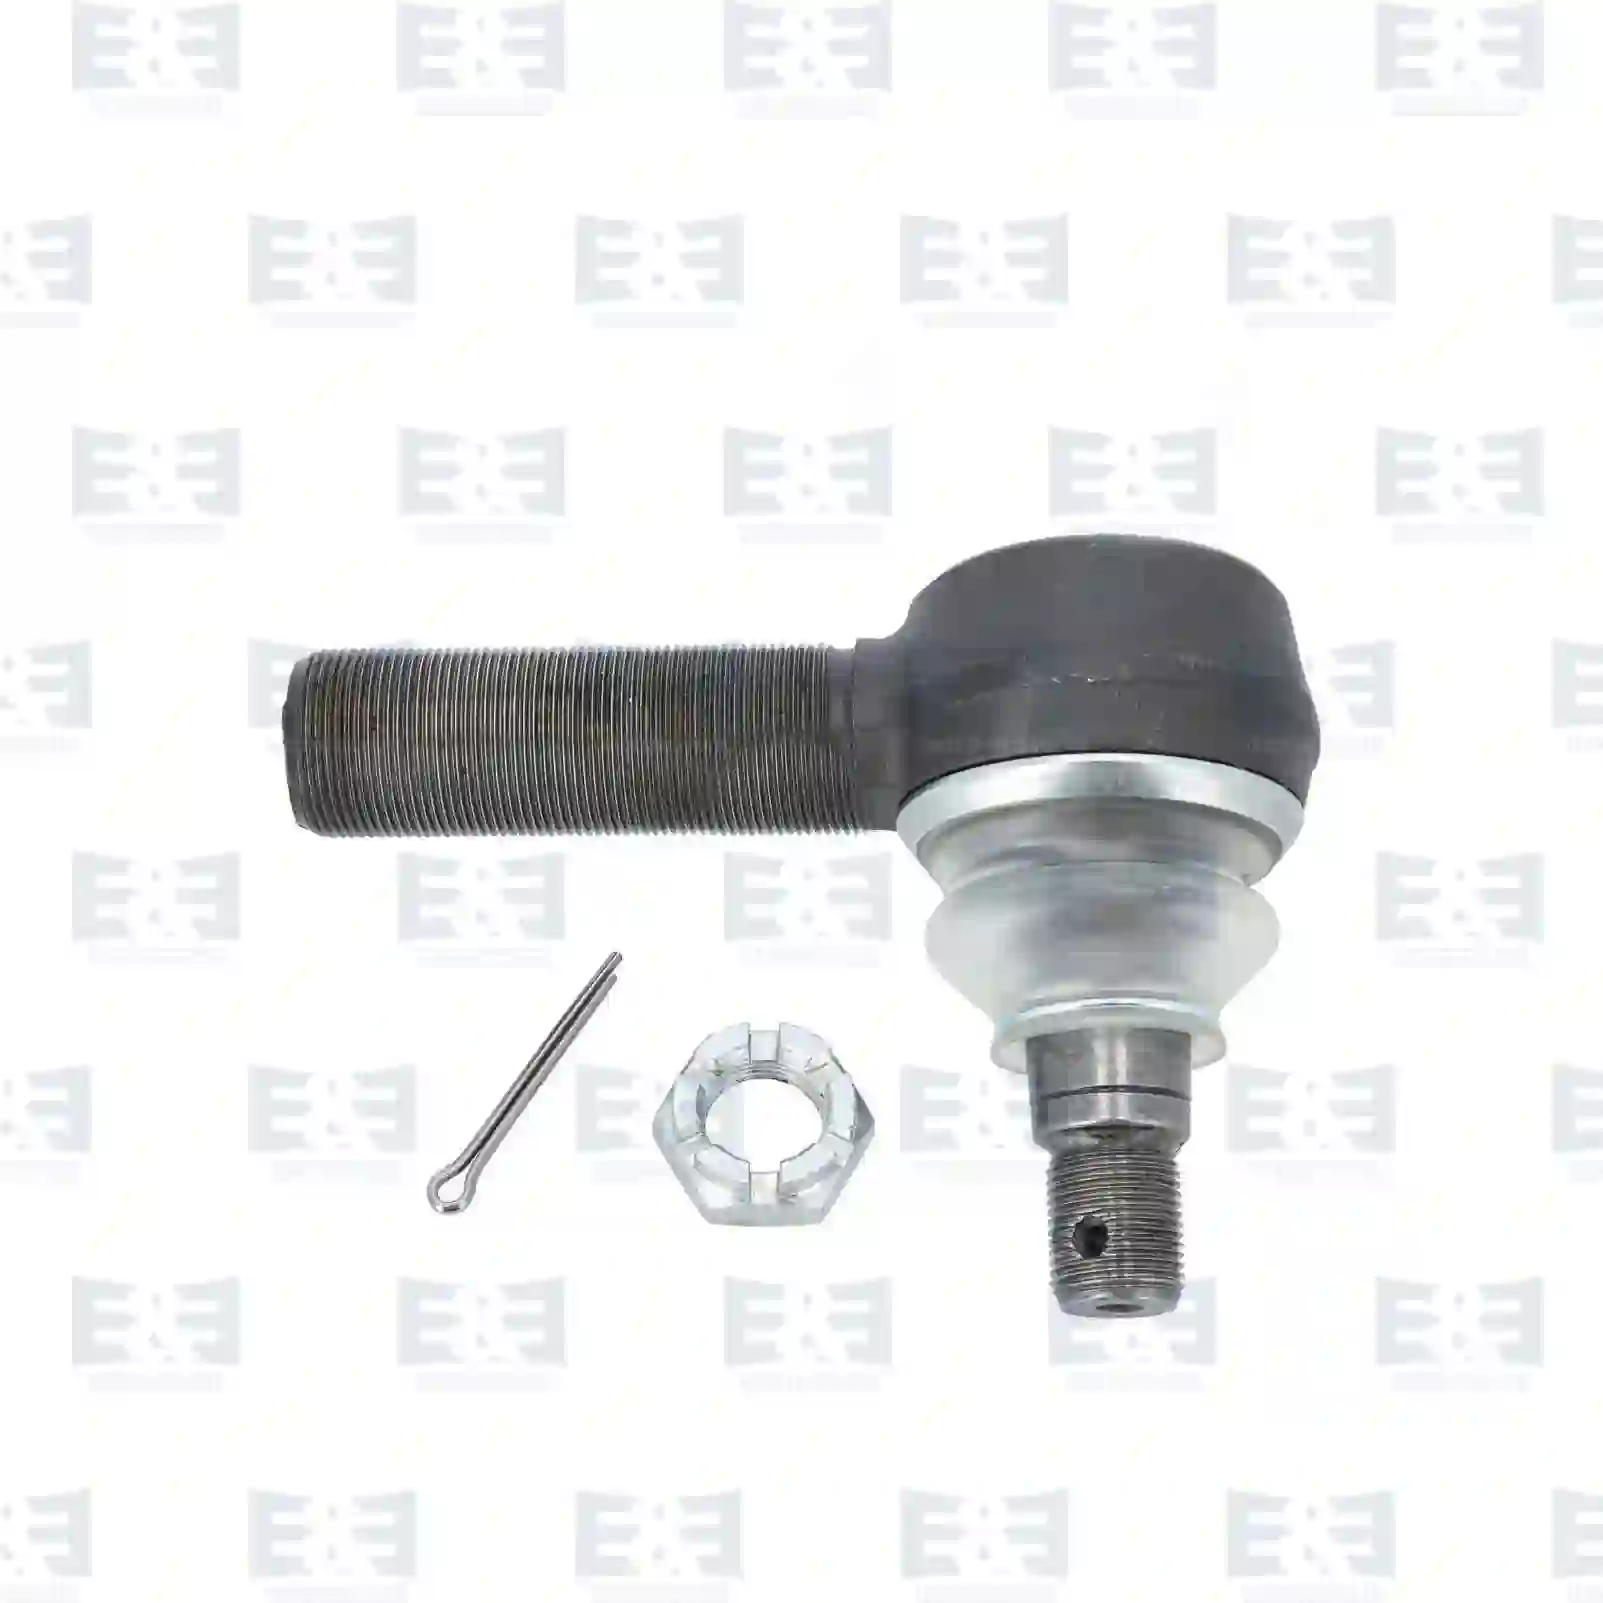 Ball joint, right hand thread, 2E2205742, 0069867, 0161376, 0608000, 1142173, 1326866, 161376, 608000, 69867, 02980875, 8408396, 99707030174, OG92293, 02980875, 2980875, 81953010025, 81953016151, 90804154117, 0004600148, 0004601848, 0004602648, 0004602748, 84053458, 5000295226, 5000808458, 7701002911, 6851447000, 6851478000, 6851486000, 6851488000, 6851523000, 6851533000, 6861486000, ZG40388-0008 ||  2E2205742 E&E Truck Spare Parts | Truck Spare Parts, Auotomotive Spare Parts Ball joint, right hand thread, 2E2205742, 0069867, 0161376, 0608000, 1142173, 1326866, 161376, 608000, 69867, 02980875, 8408396, 99707030174, OG92293, 02980875, 2980875, 81953010025, 81953016151, 90804154117, 0004600148, 0004601848, 0004602648, 0004602748, 84053458, 5000295226, 5000808458, 7701002911, 6851447000, 6851478000, 6851486000, 6851488000, 6851523000, 6851533000, 6861486000, ZG40388-0008 ||  2E2205742 E&E Truck Spare Parts | Truck Spare Parts, Auotomotive Spare Parts